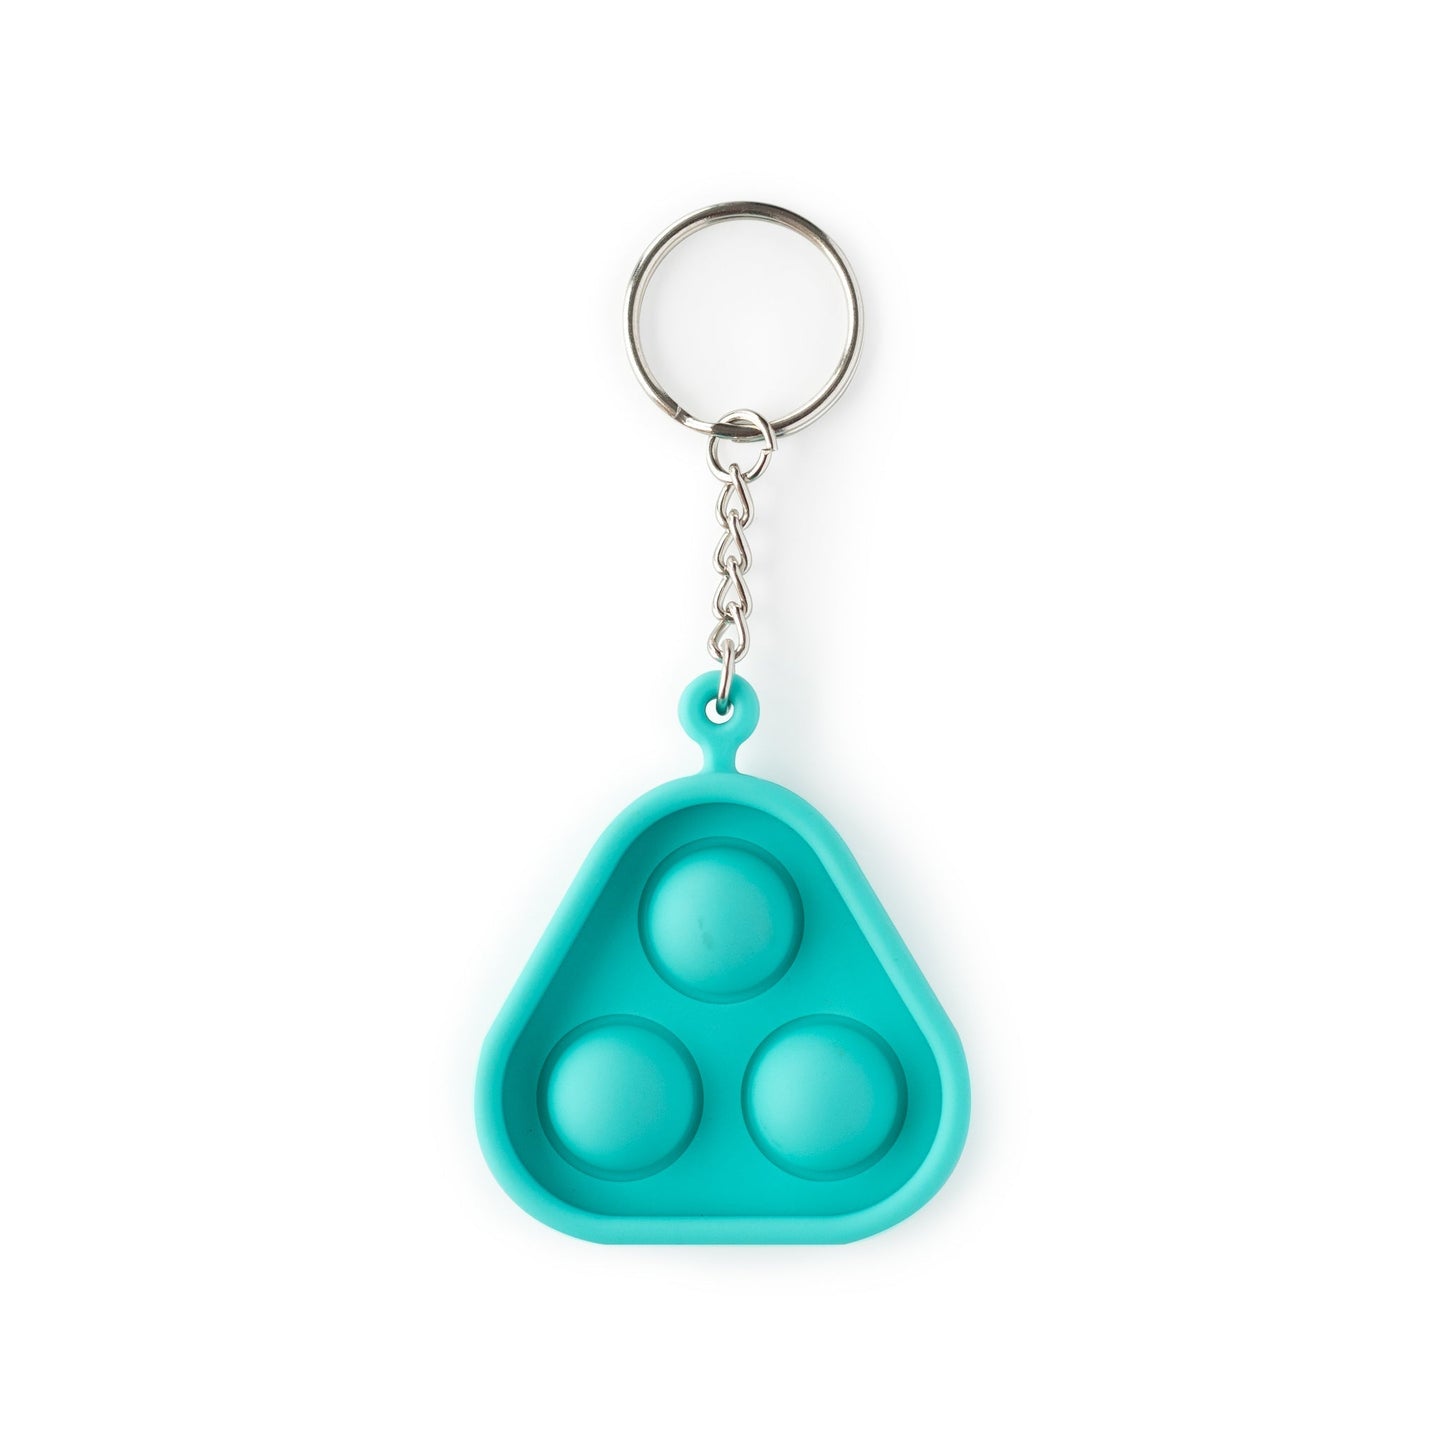 Accessories Bubble-Popper Keychain Turquoise from Cara & Co Craft Supply